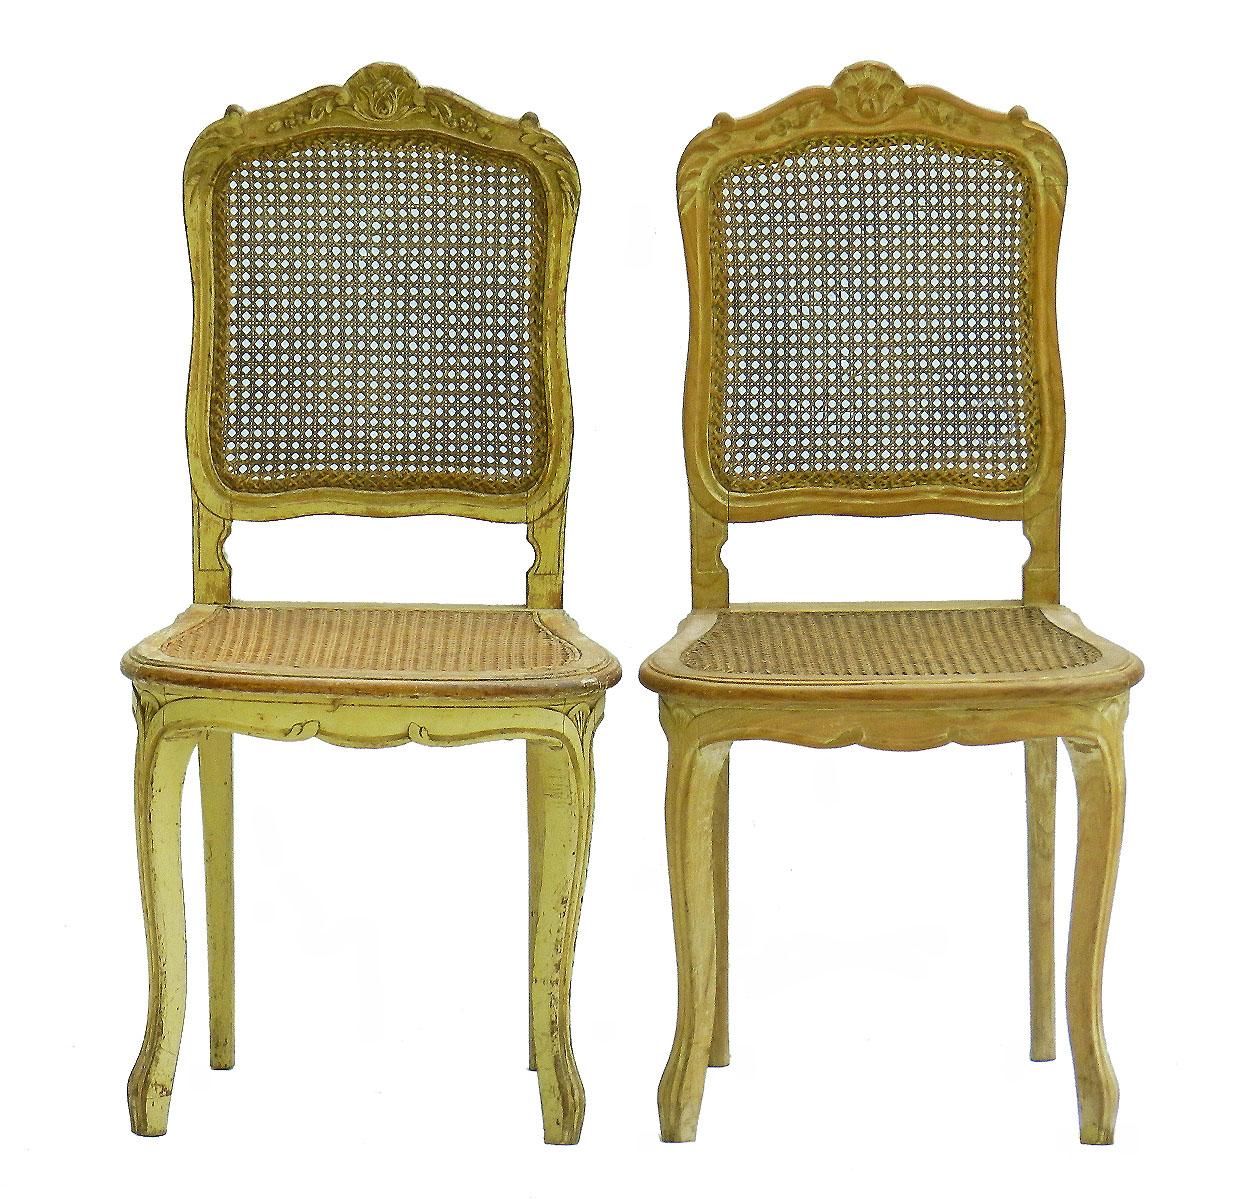 Pair of 19th century side chairs French Louis XV revival original paint caned
Original paint gloriously distressed through age with lovely patina
Original cane work is good
Sound and solid
Really charming pair of accent chairs for an